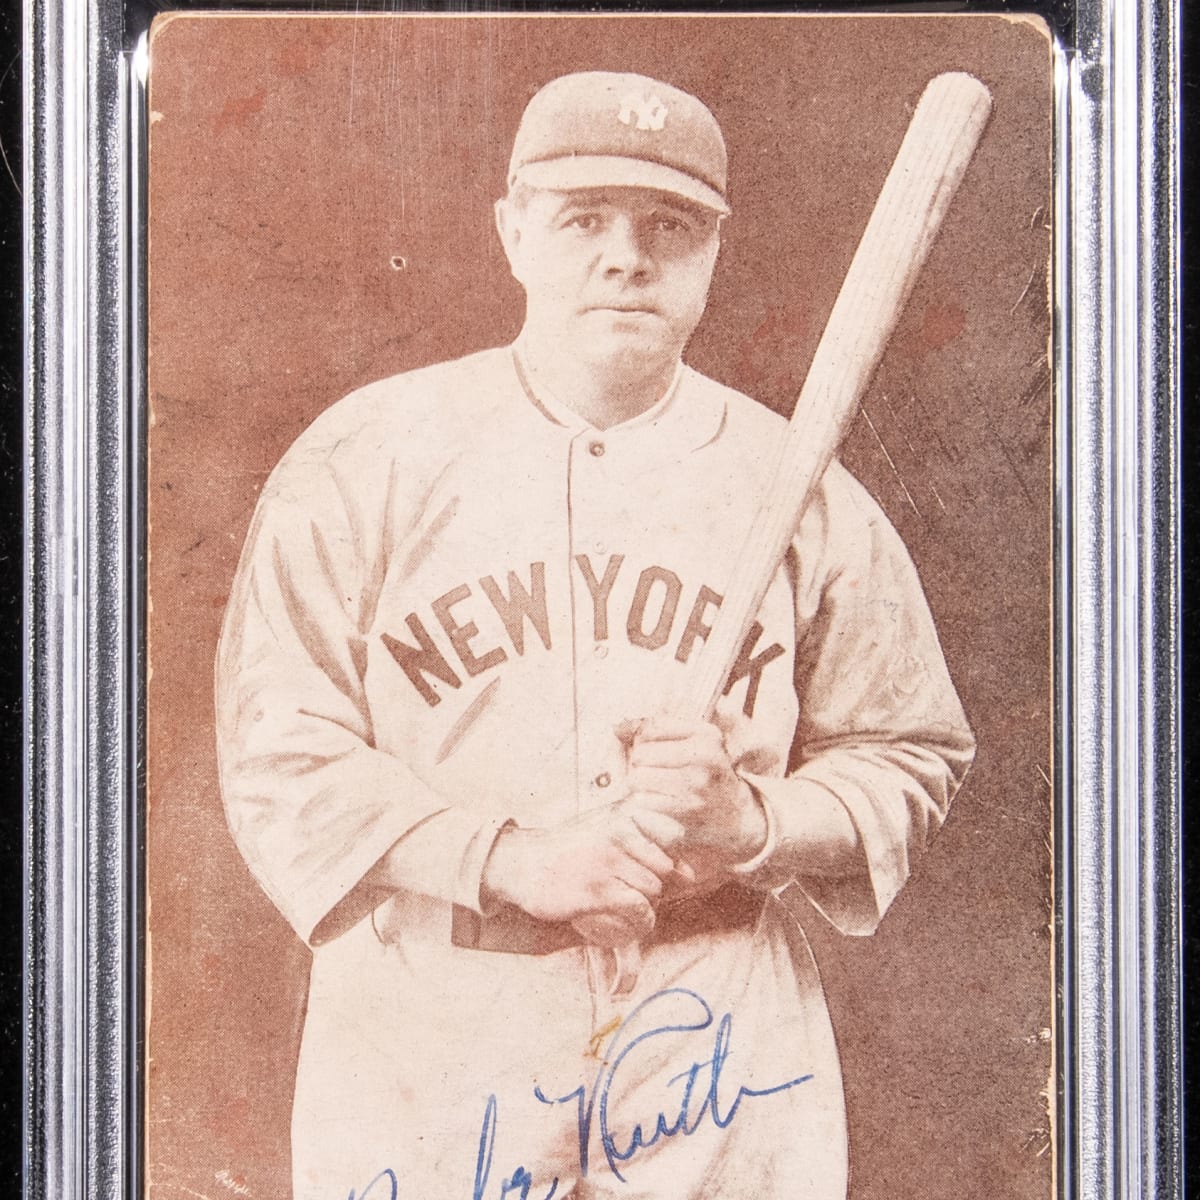 Sports Legends Museum to host Babe Ruth 100th anniversary auction